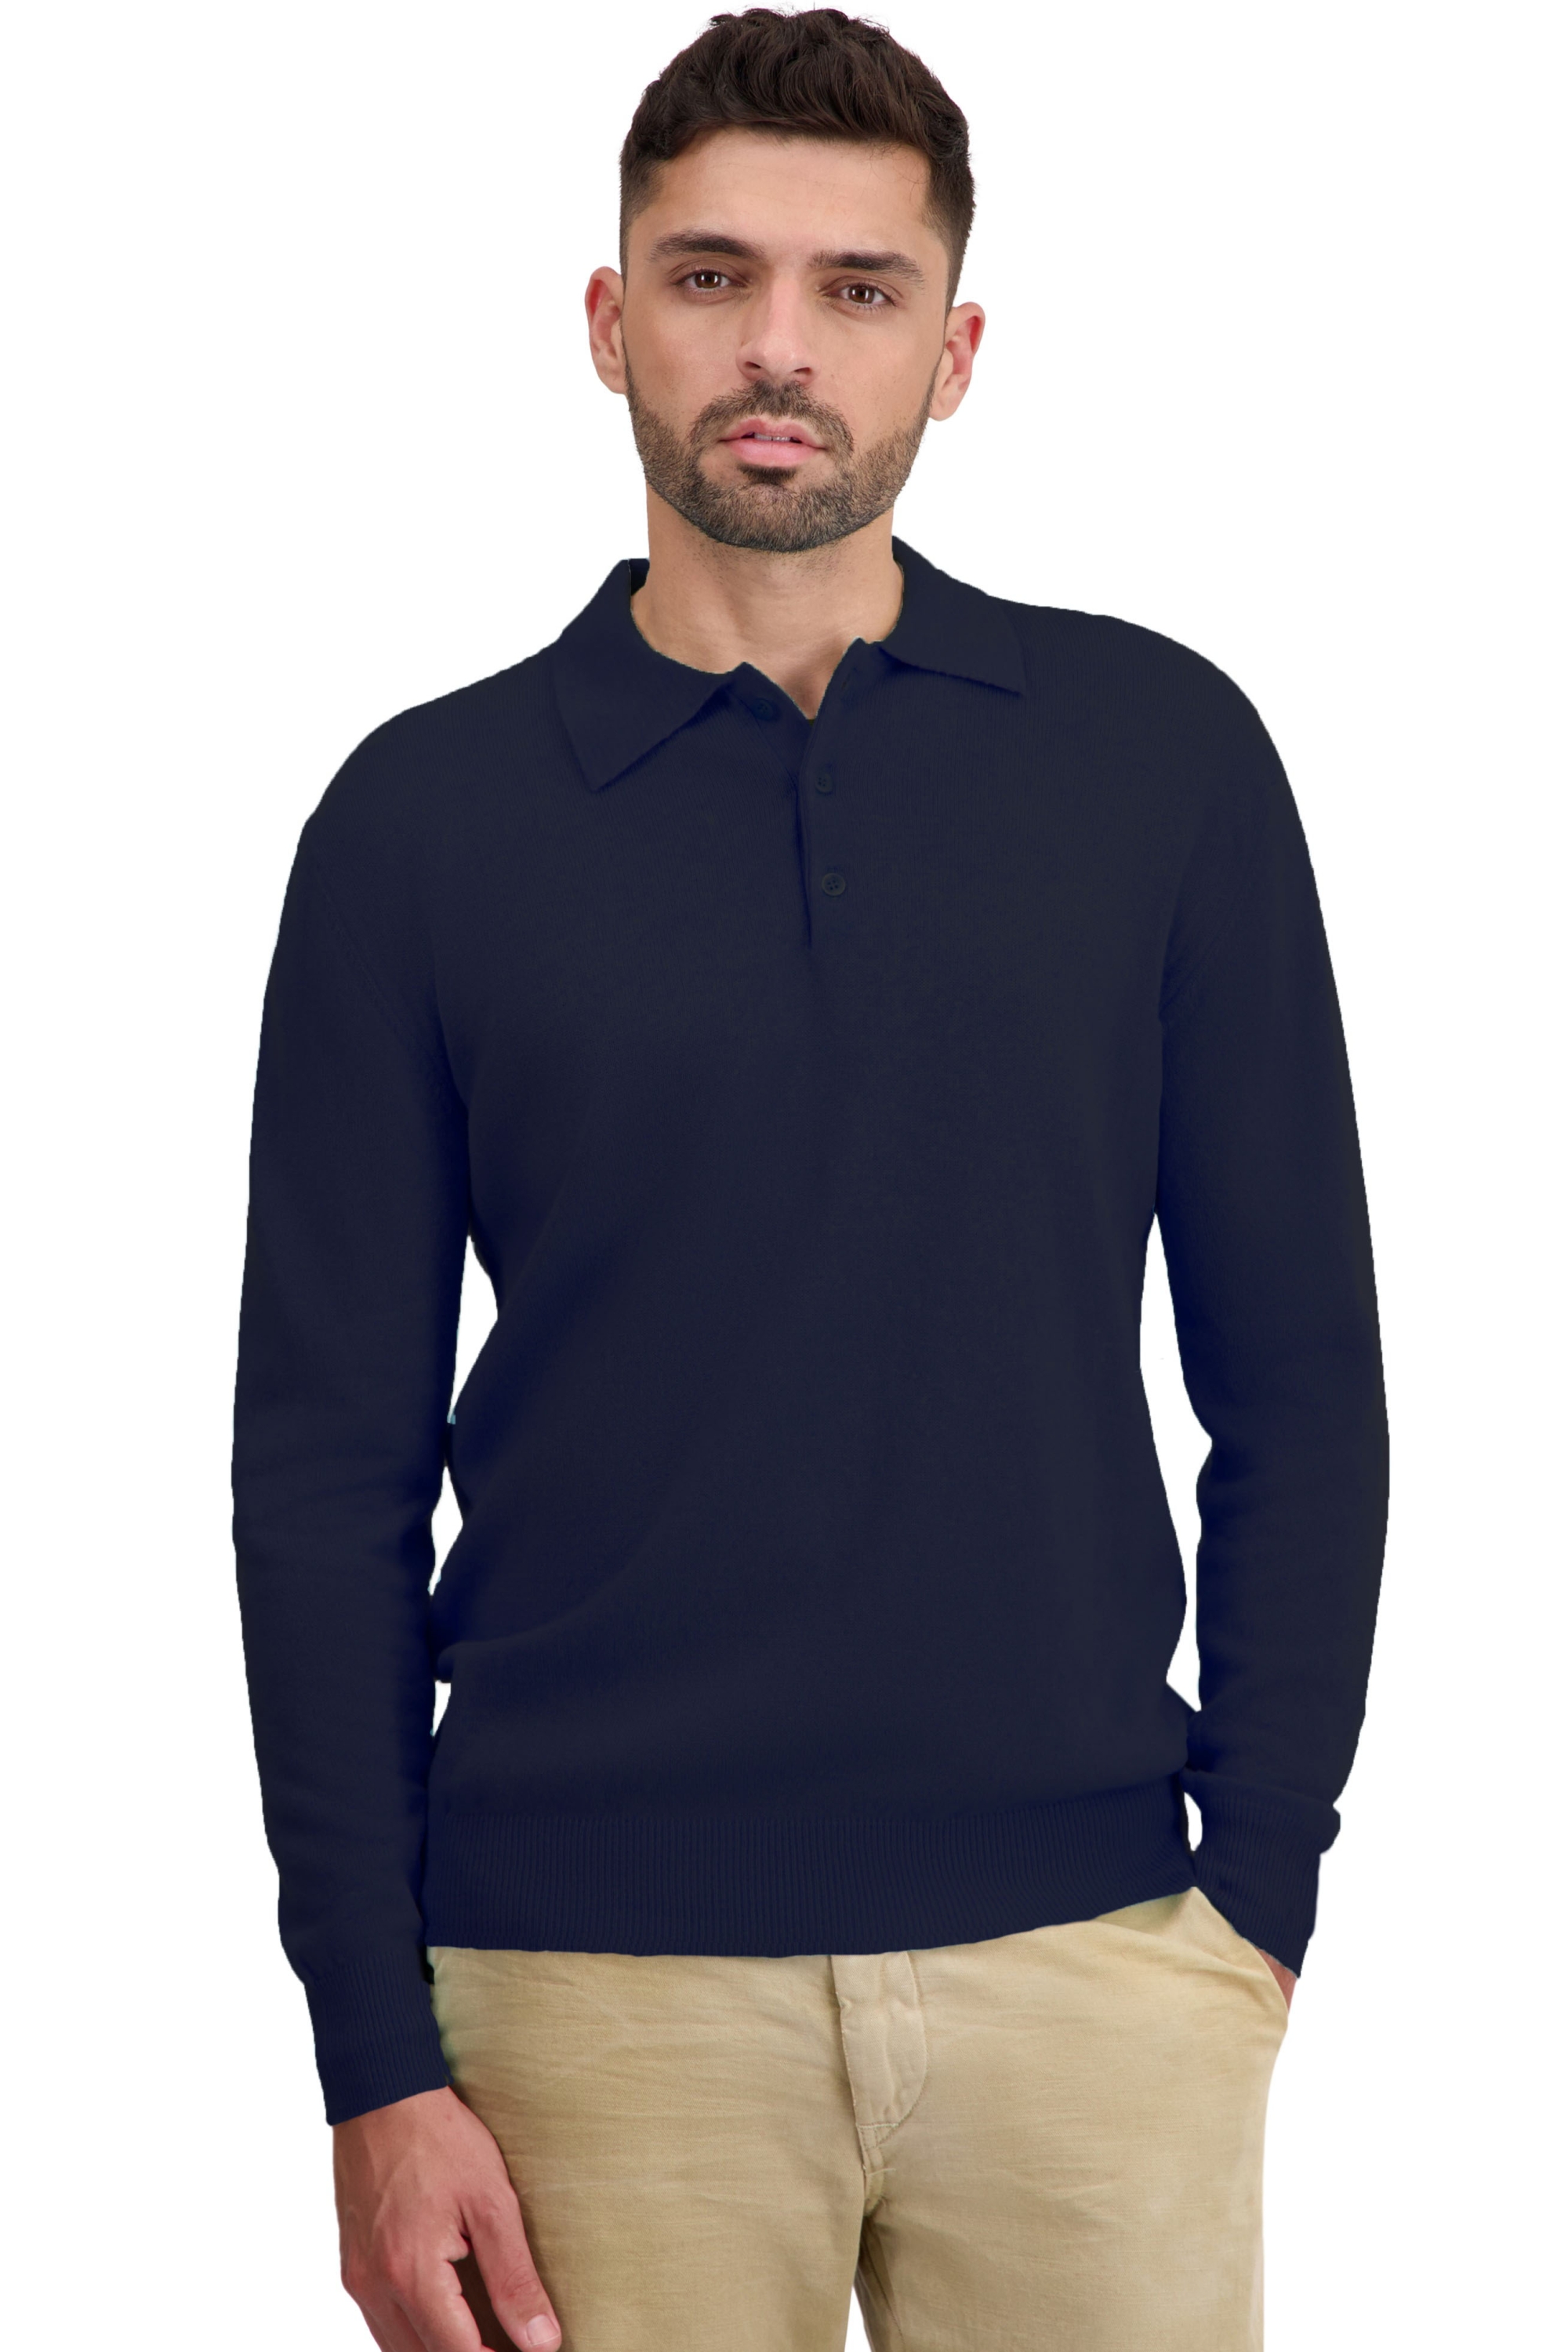 Cashmere men basic sweaters at low prices tarn first dress blue m